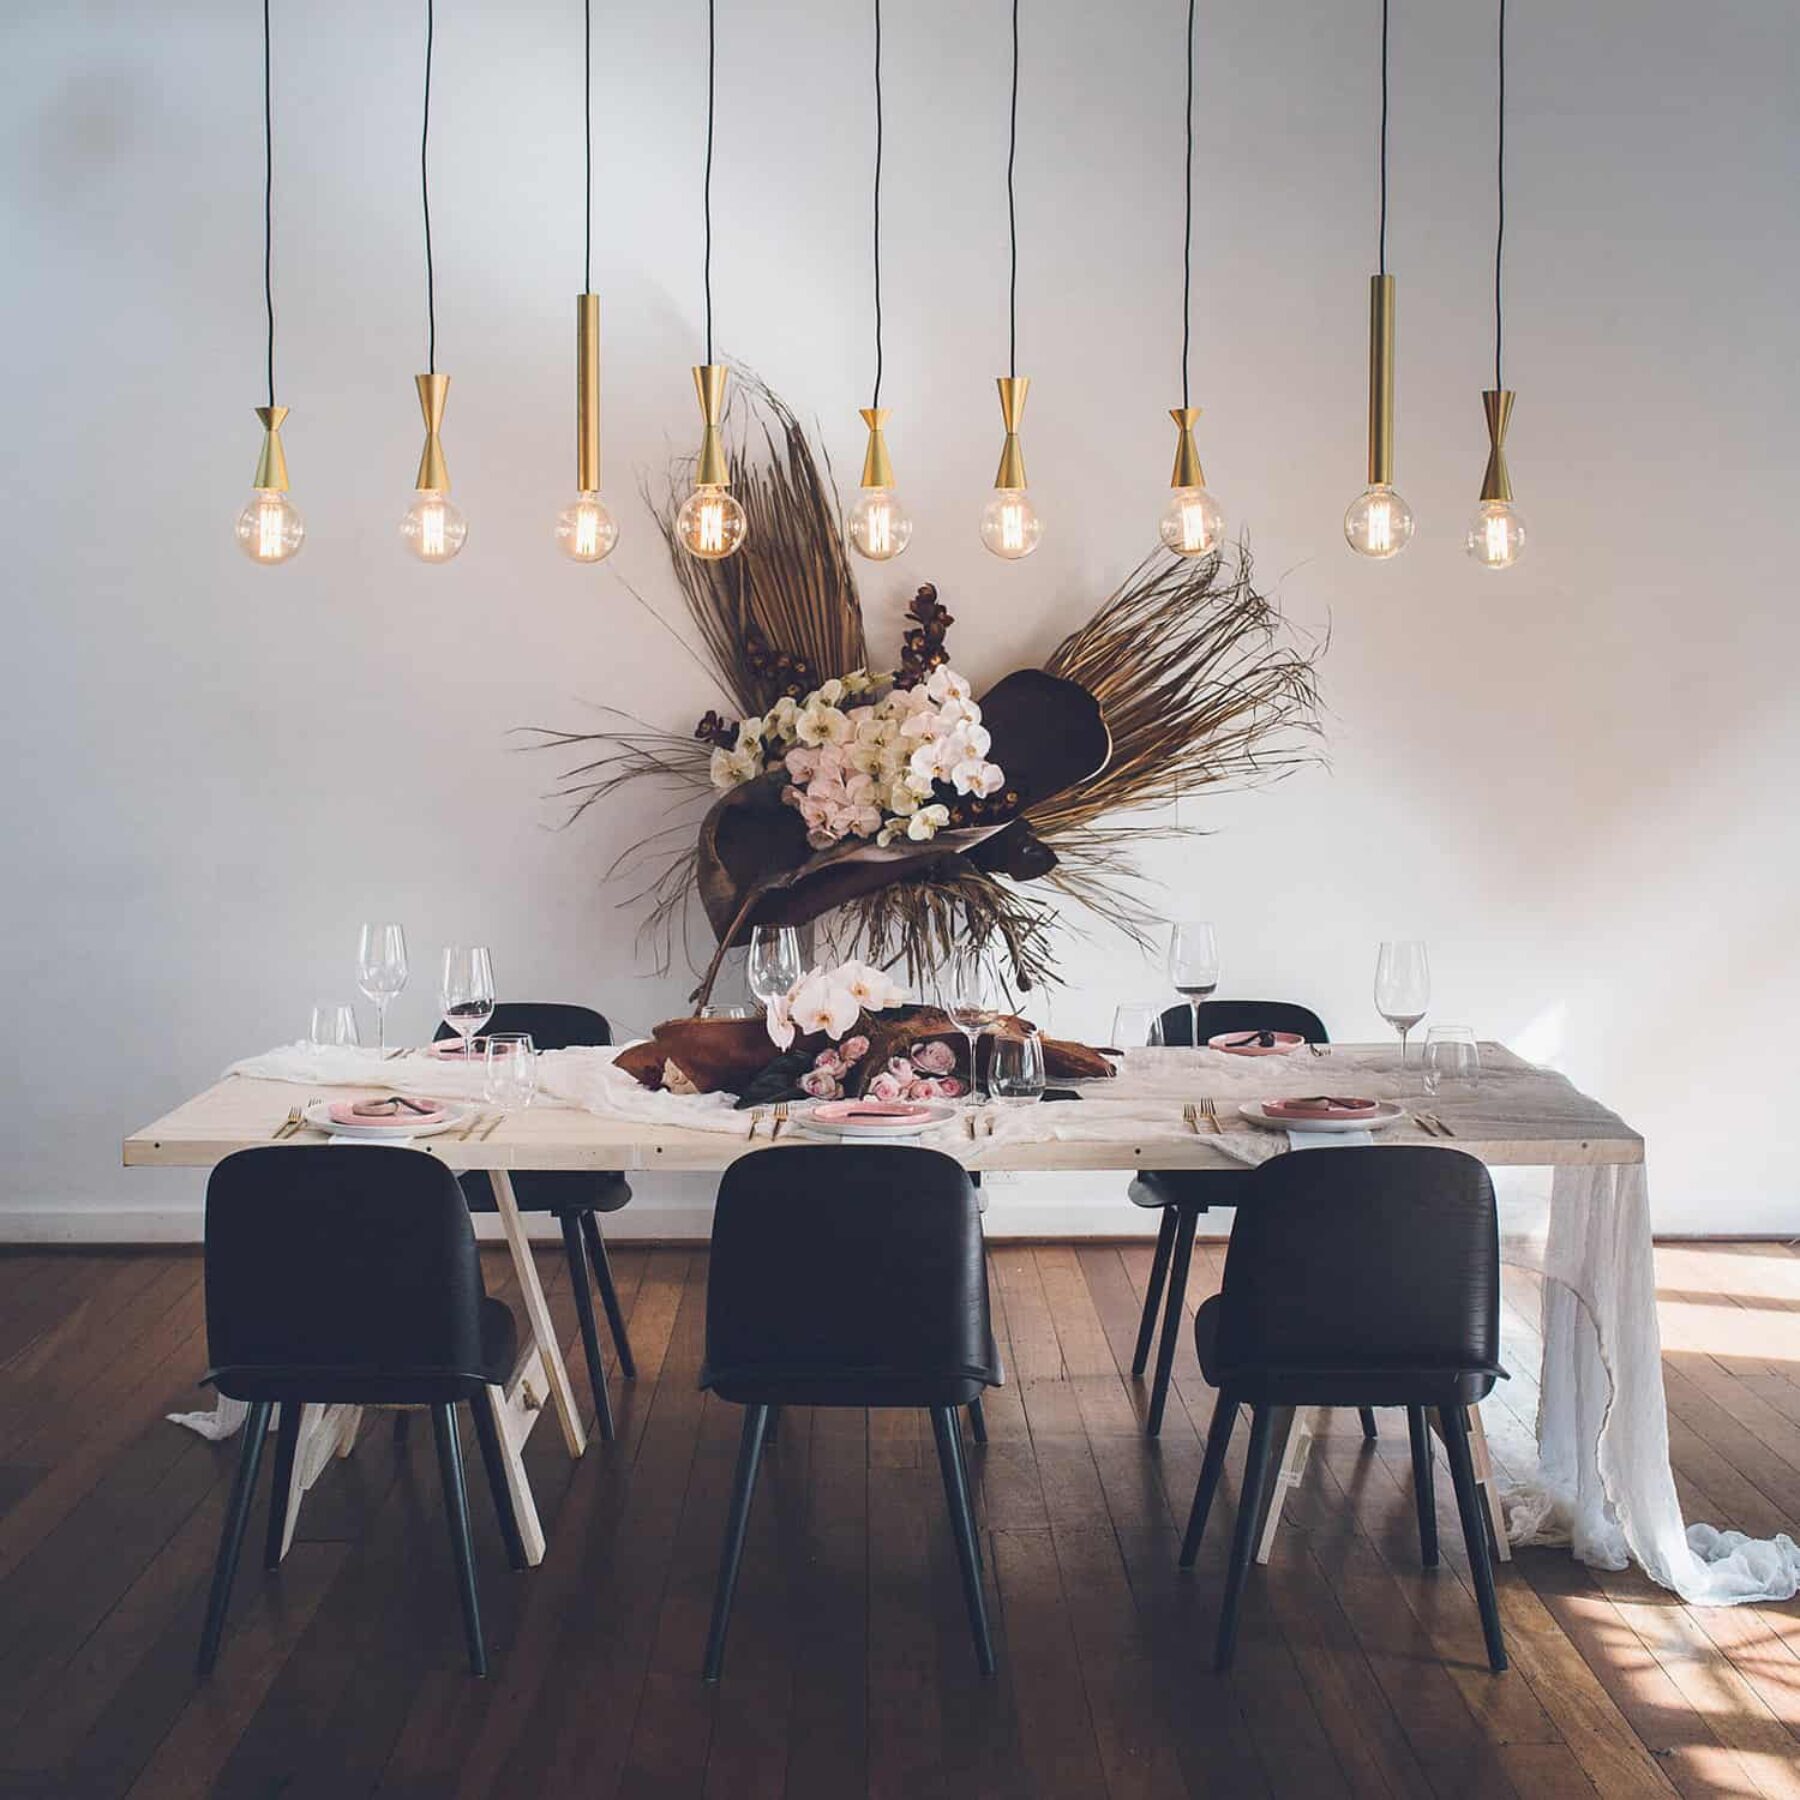 blush and burgundy table setting with hanging pendant lights